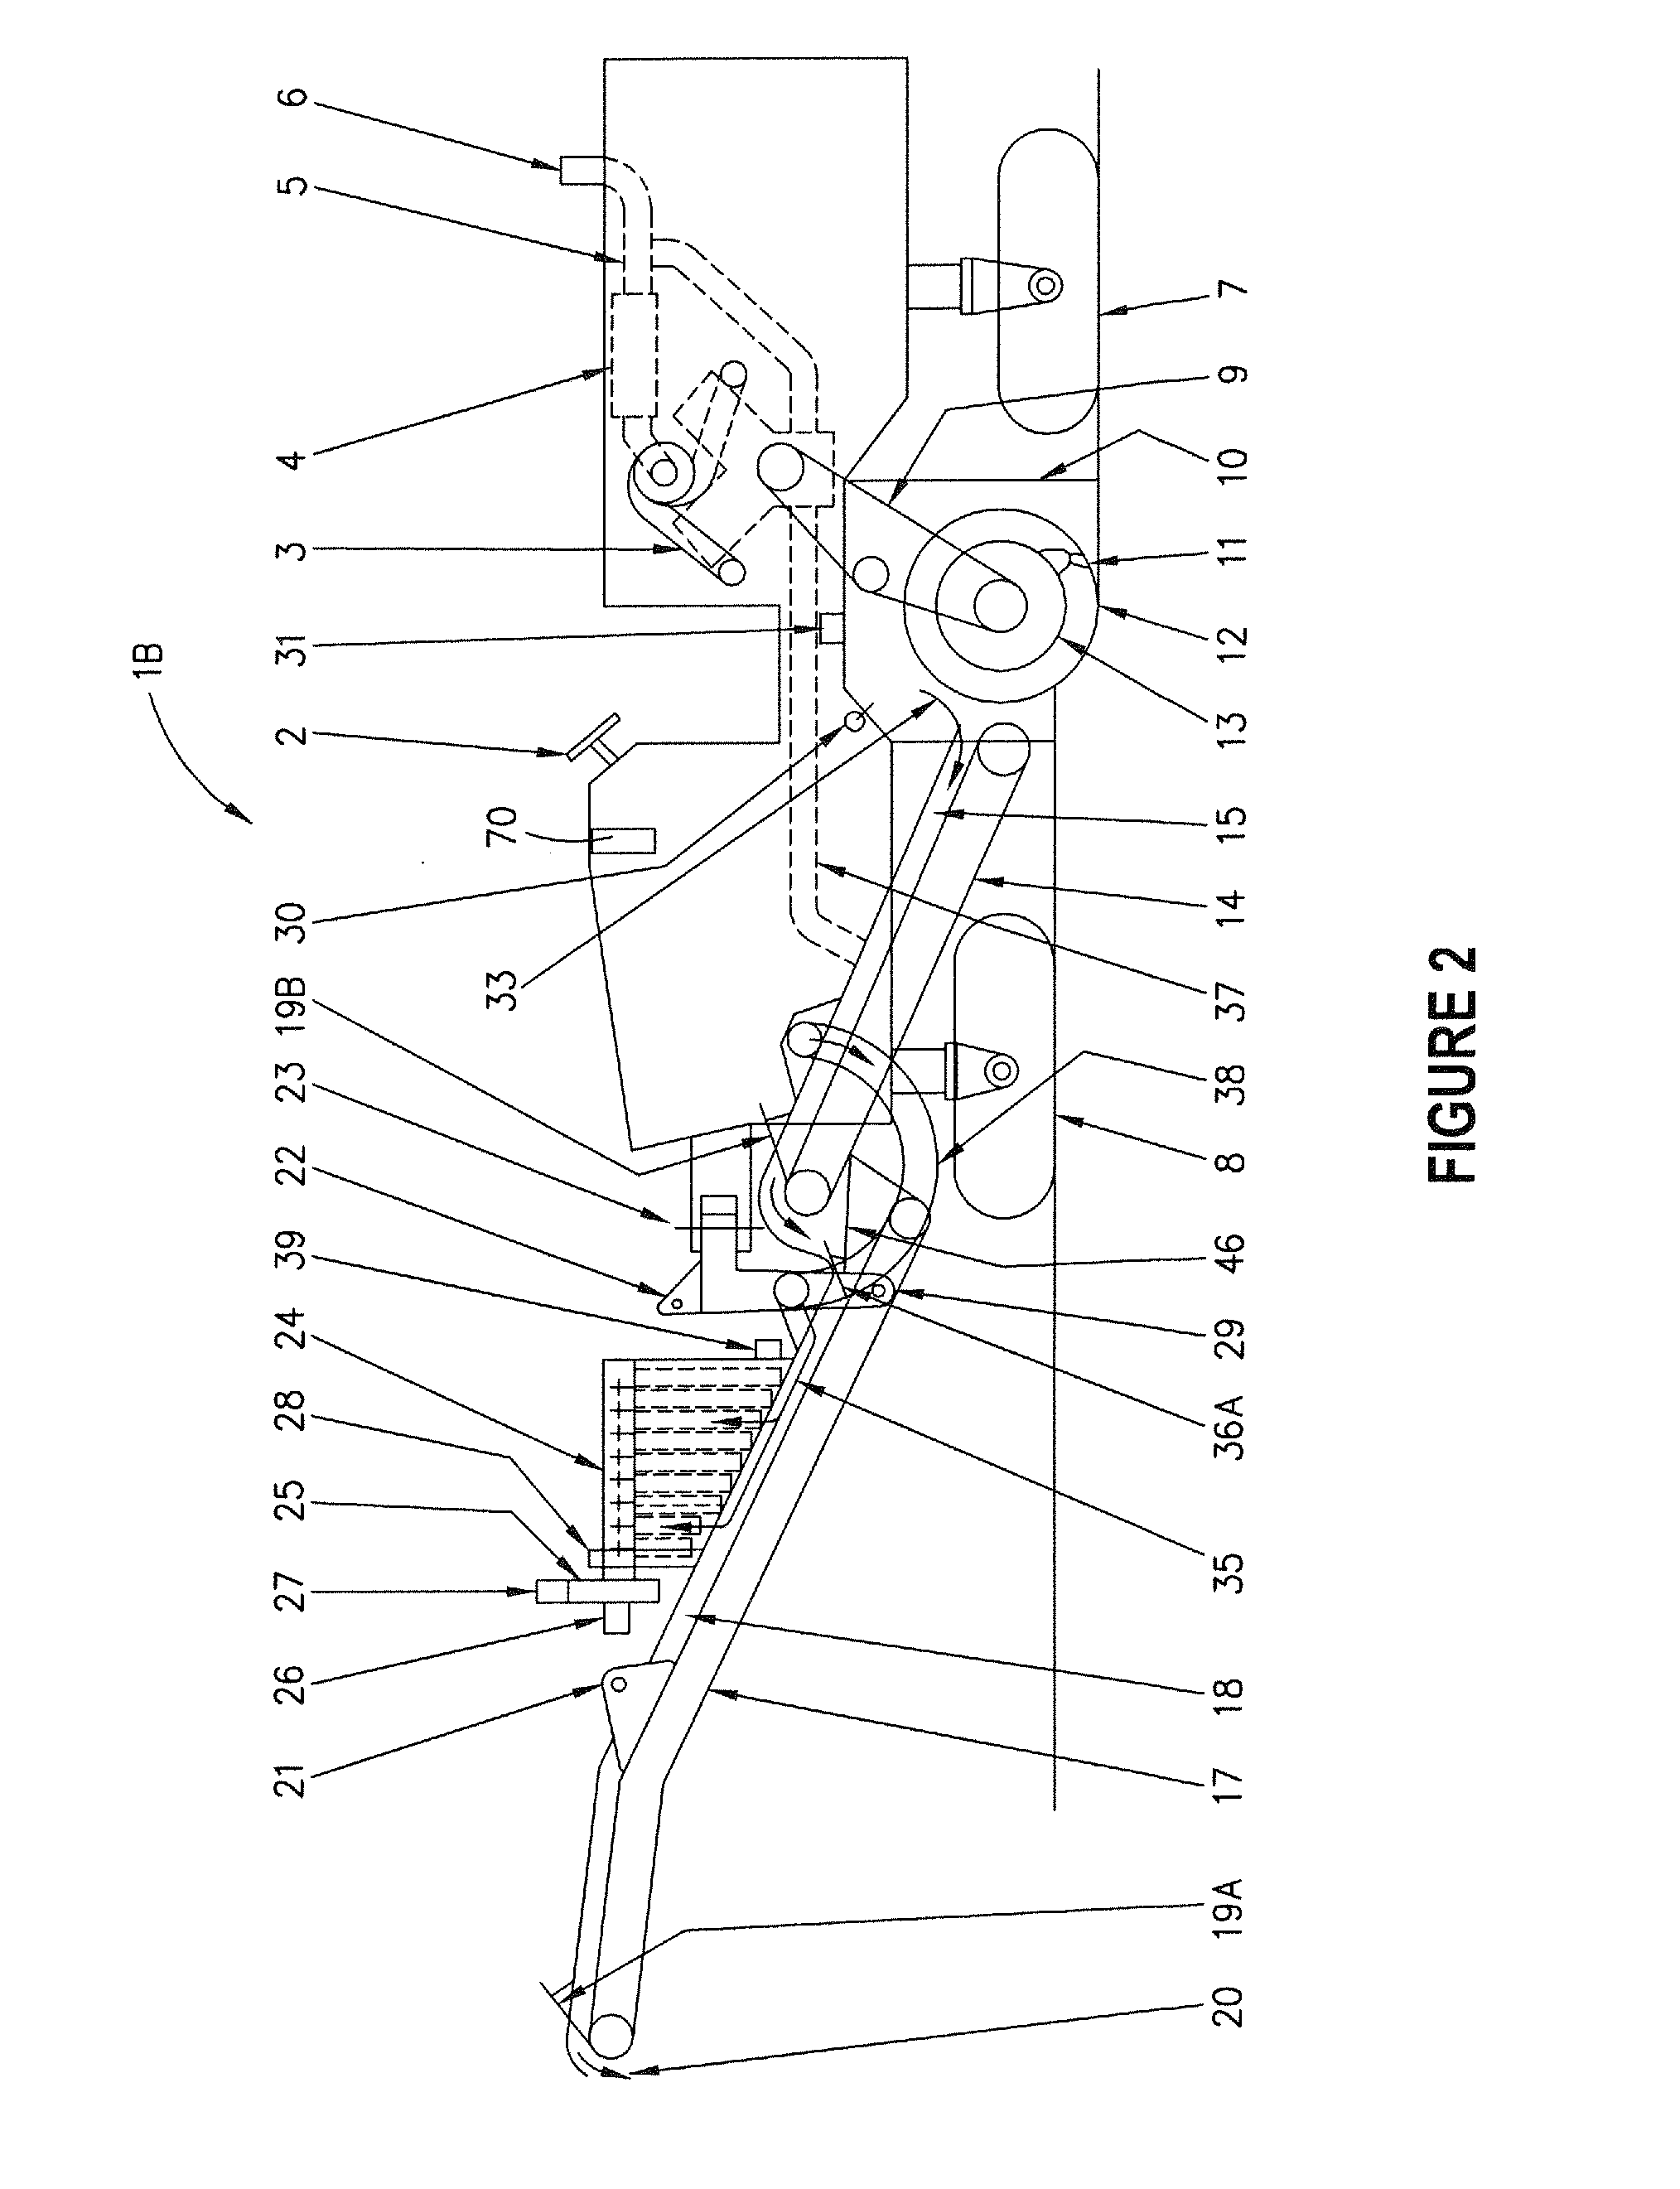 Method and apparatus for controlling dust emissions with temperature control